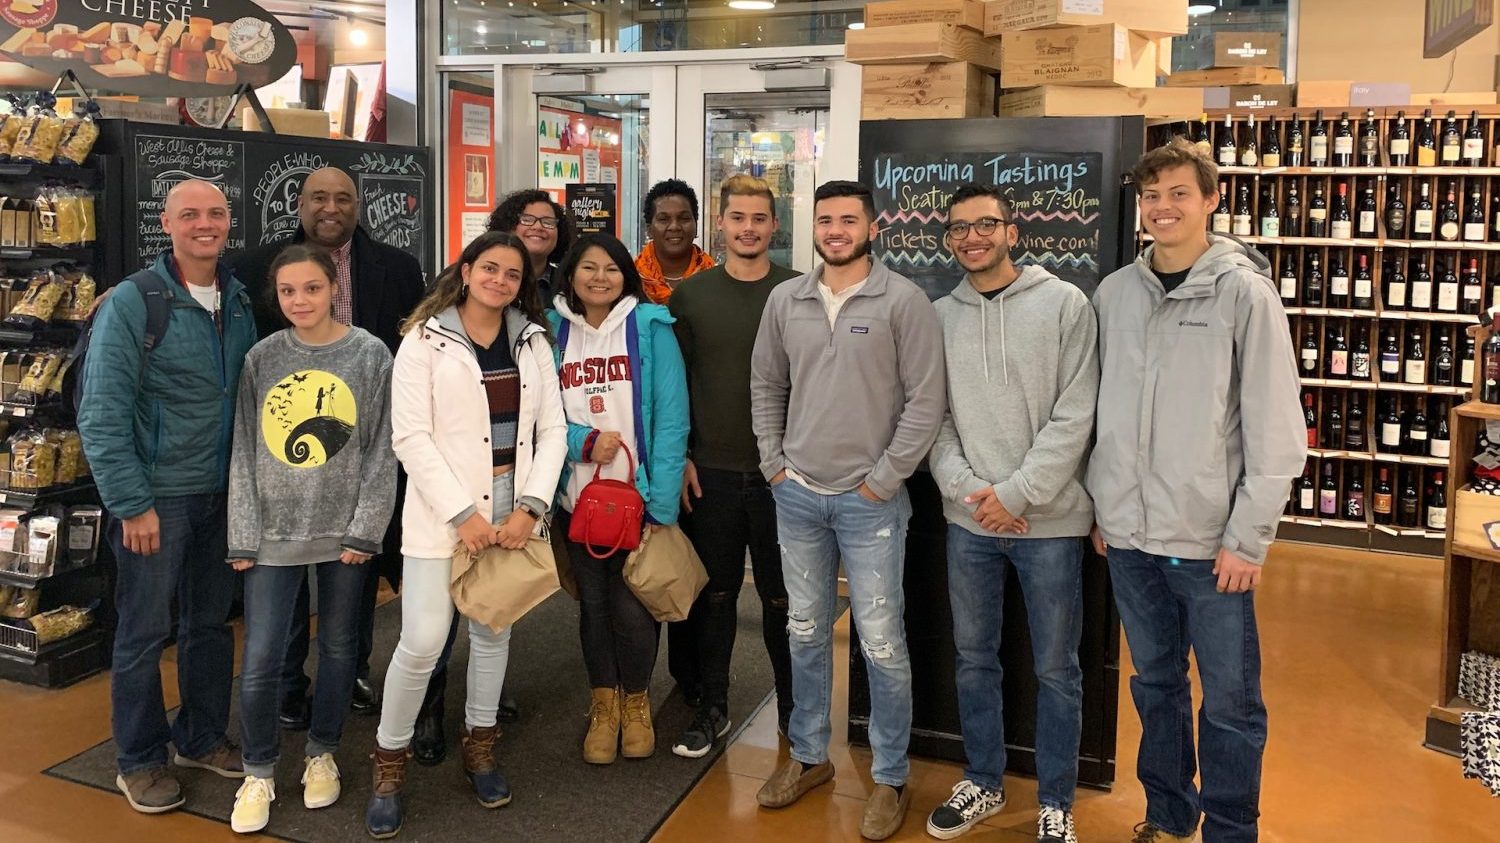 Group of students posing together in specialty grocery store.